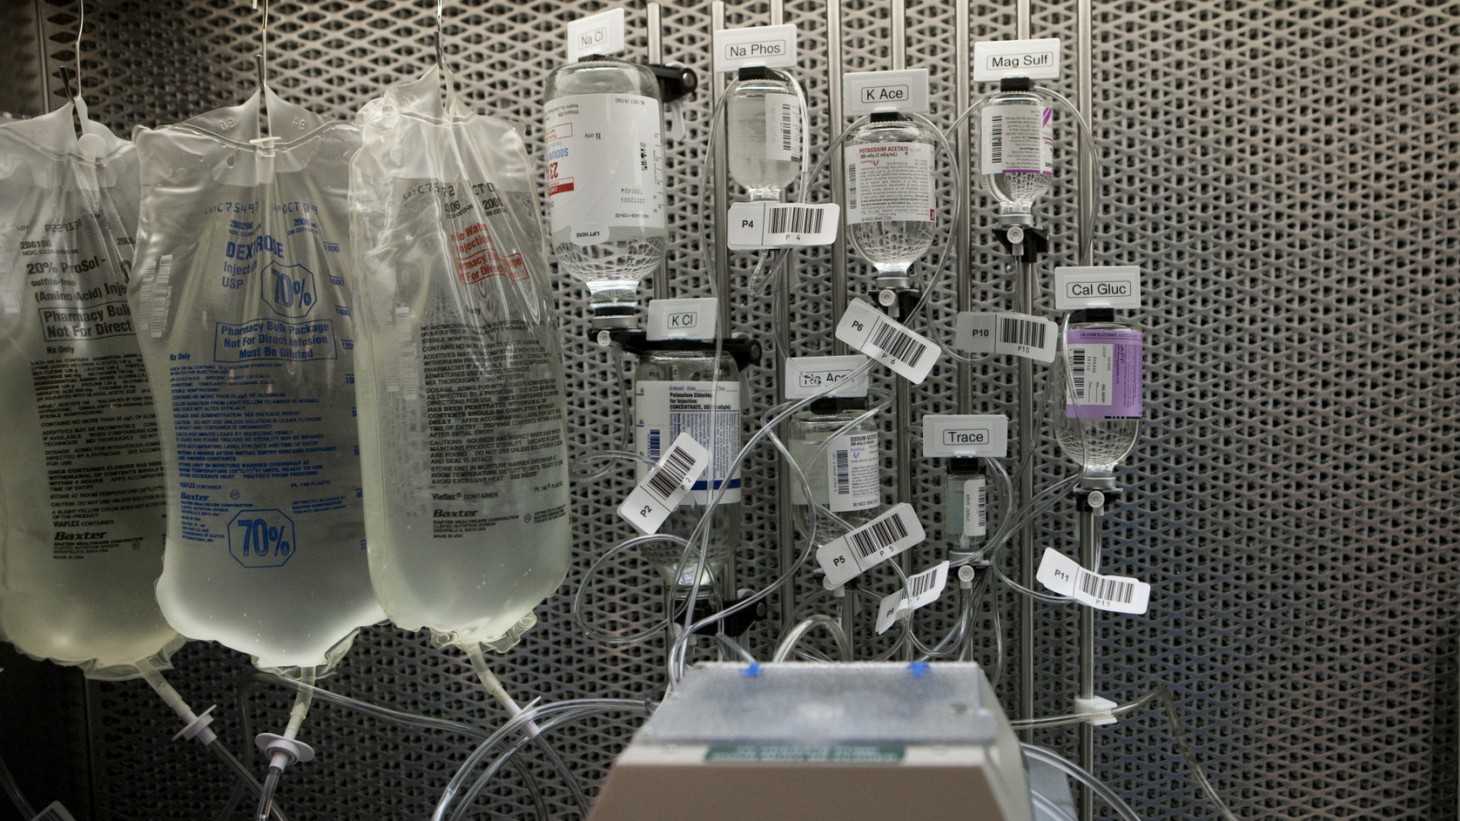 IV bags and tubing